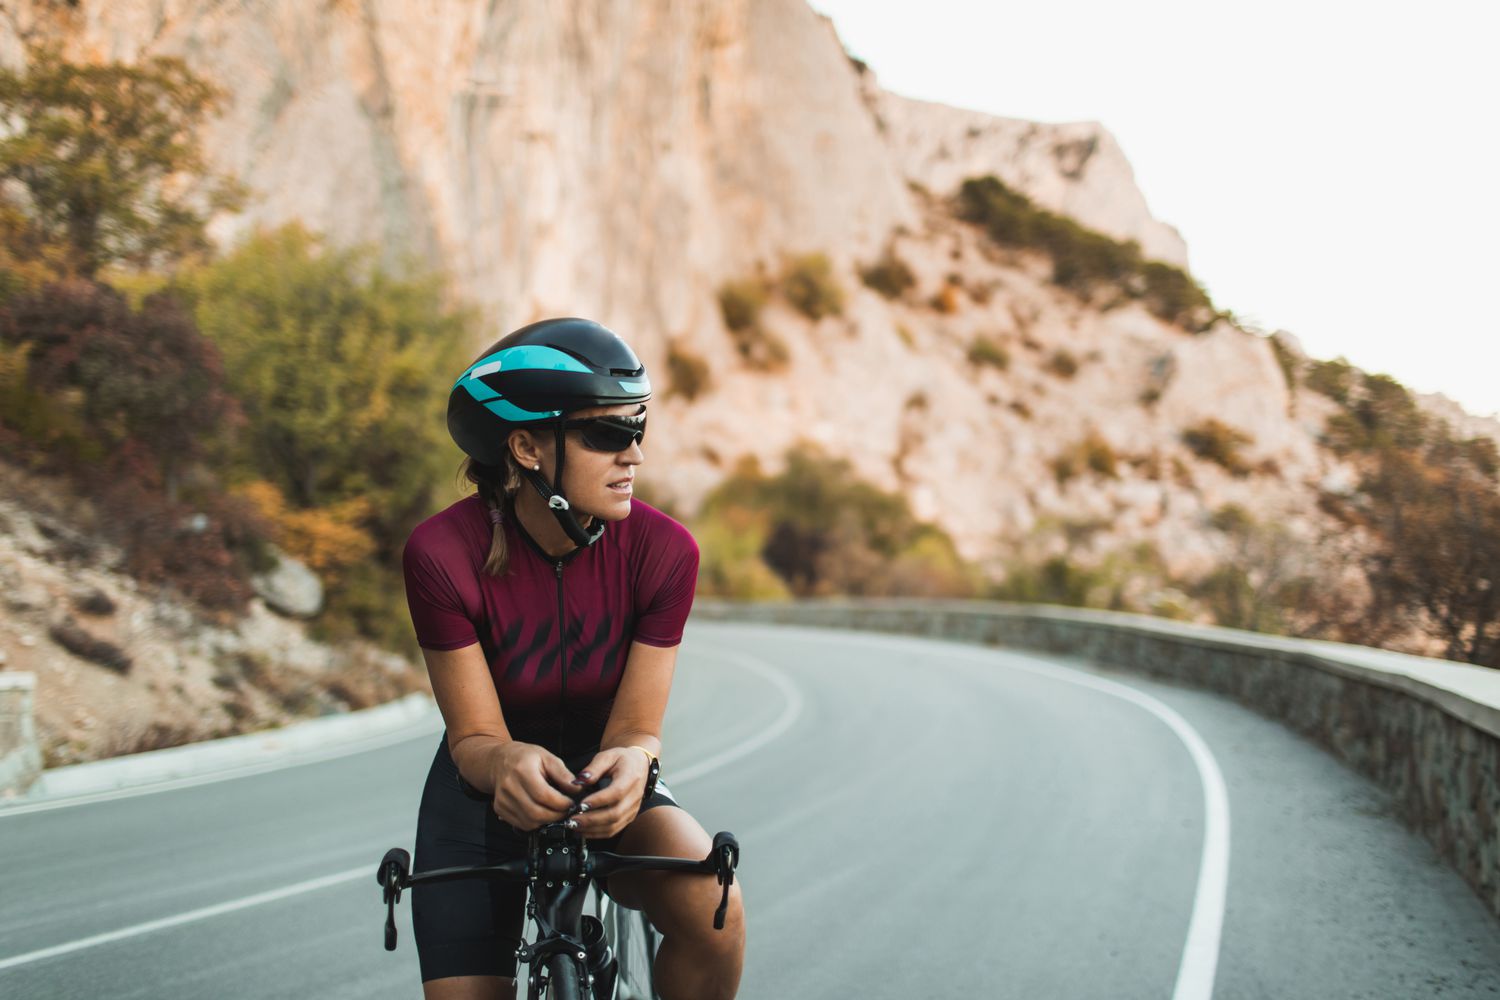 Portrait of Cyclist Woman on Road Bike with Sunglasses and Helmet